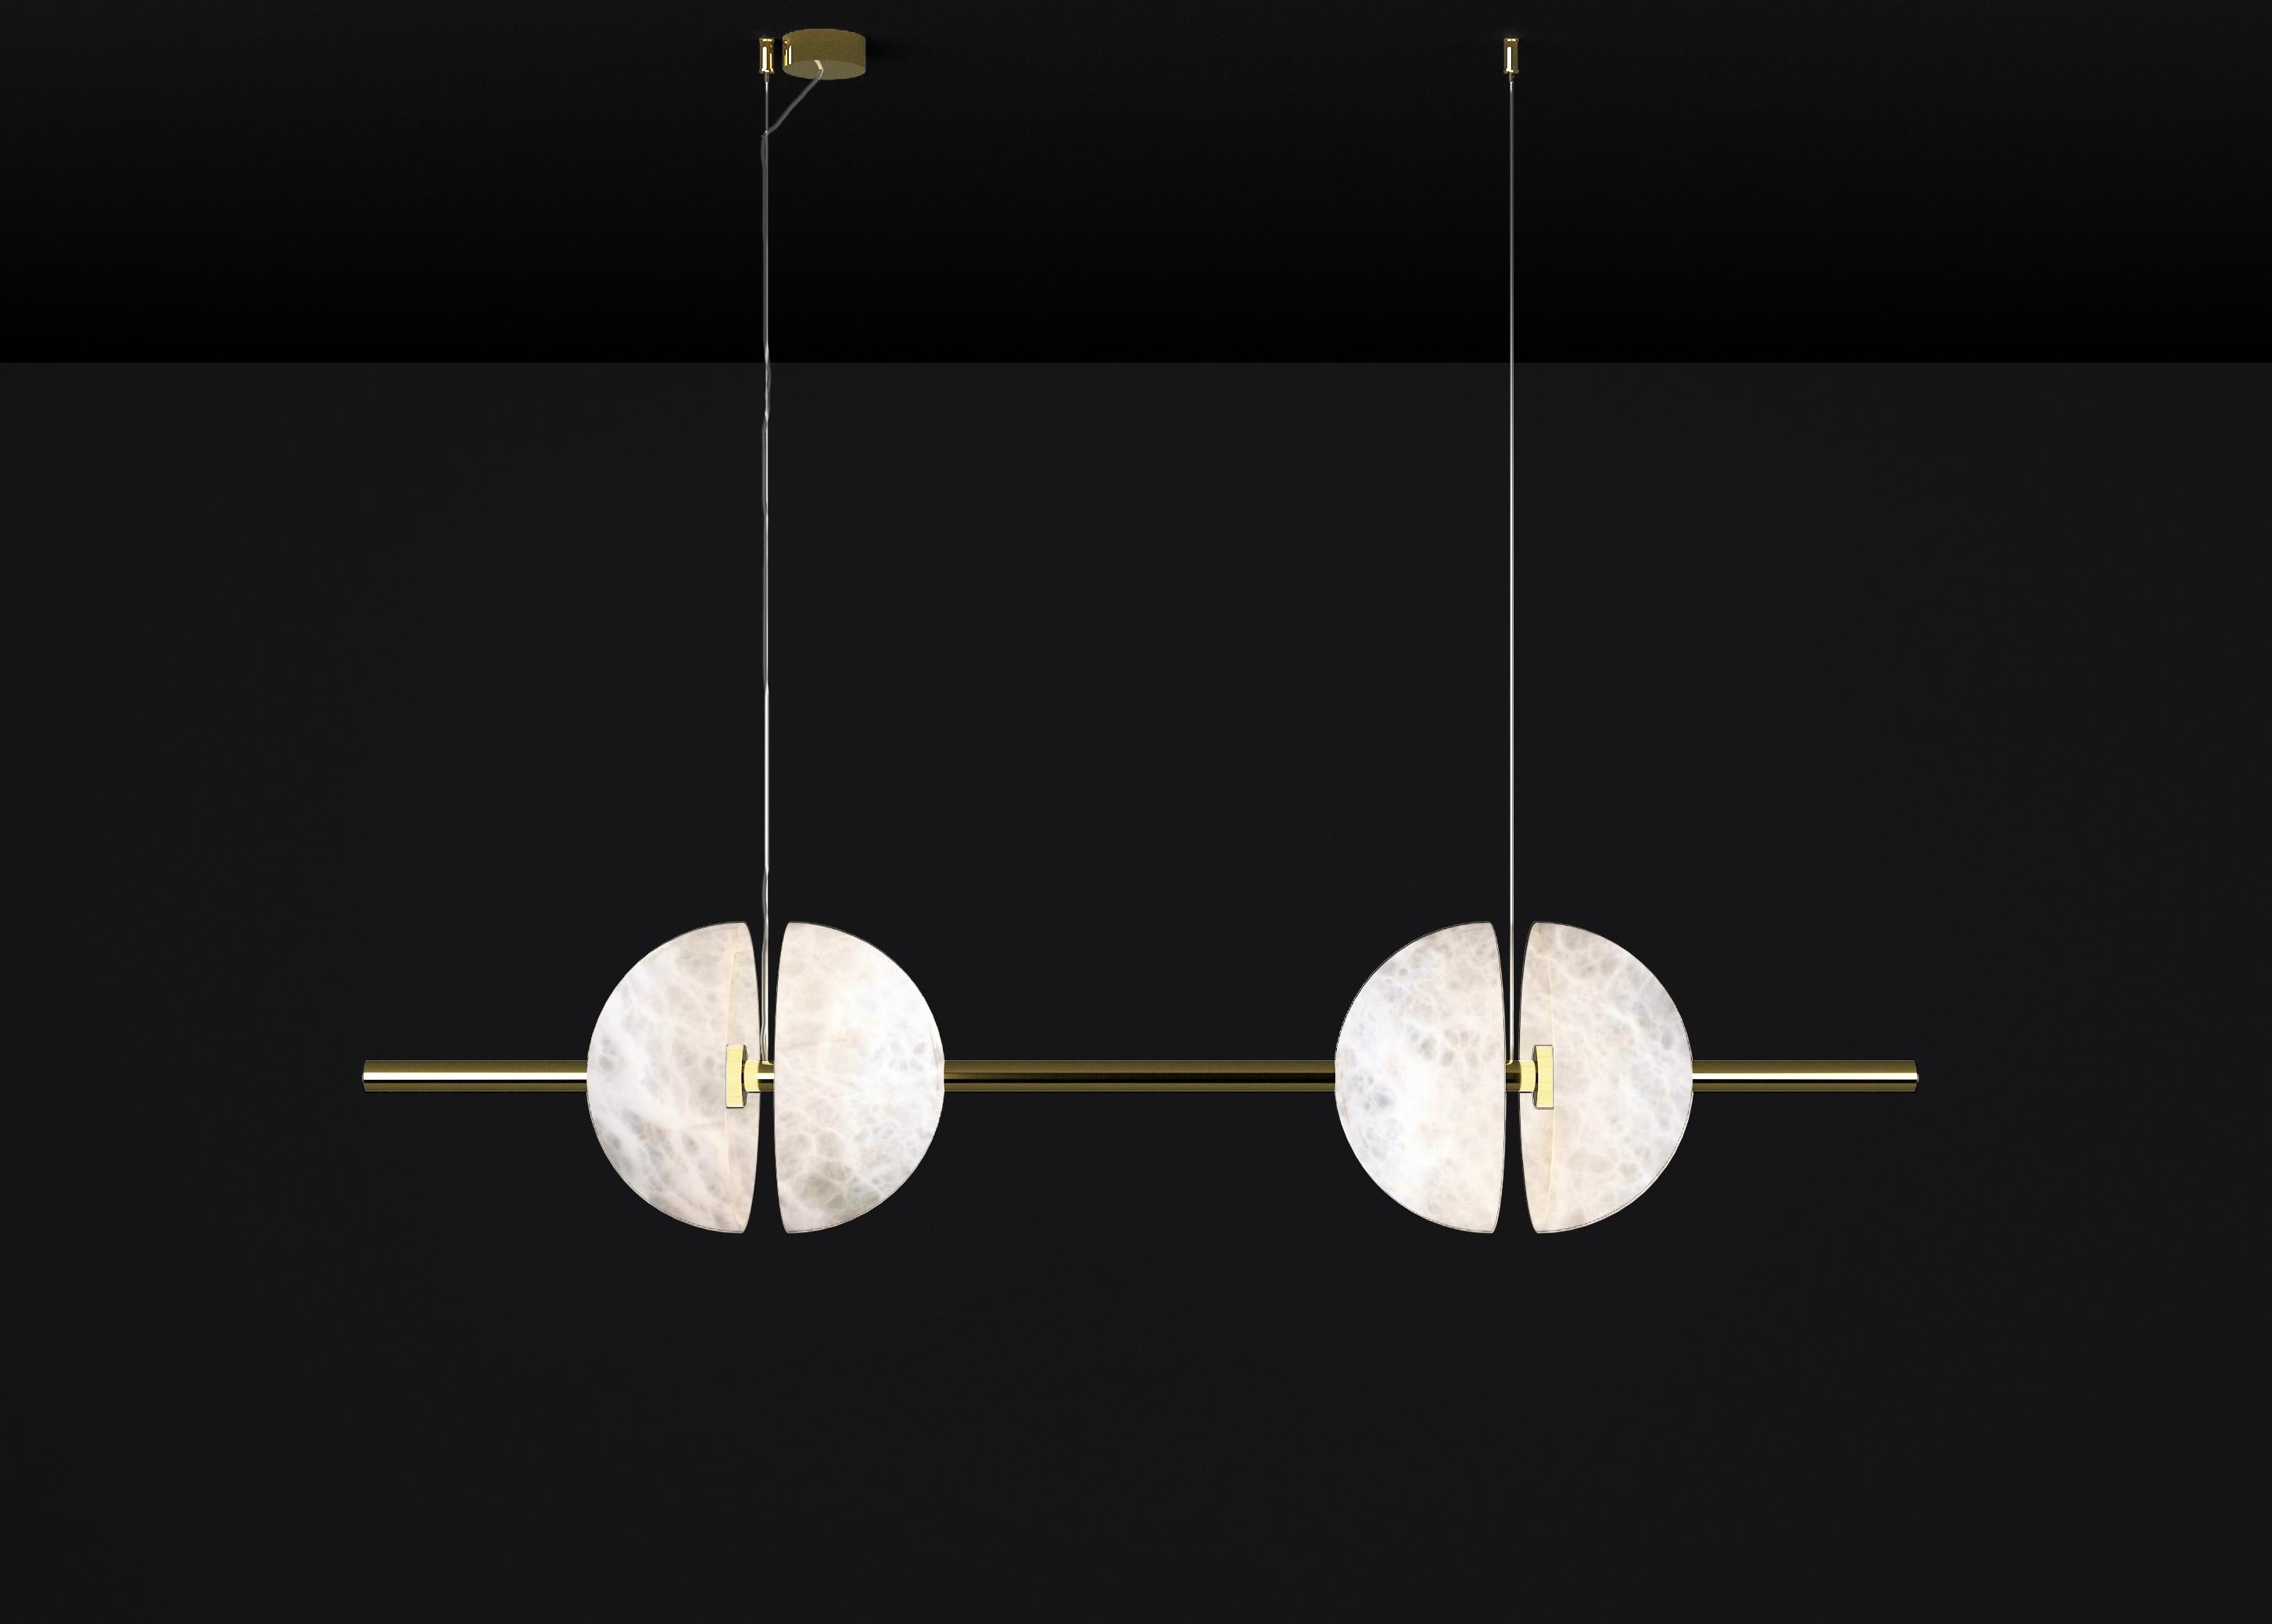 Ermes Shiny Gold Metal And Alabaster Pendant Light 1 by Alabastro Italiano
Dimensions: D 30 x W 150 x H 300 cm.
Materials: White alabaster and shiny gold metal.

Available in different finishes: Shiny Silver, Bronze, Brushed Brass, Ruggine of